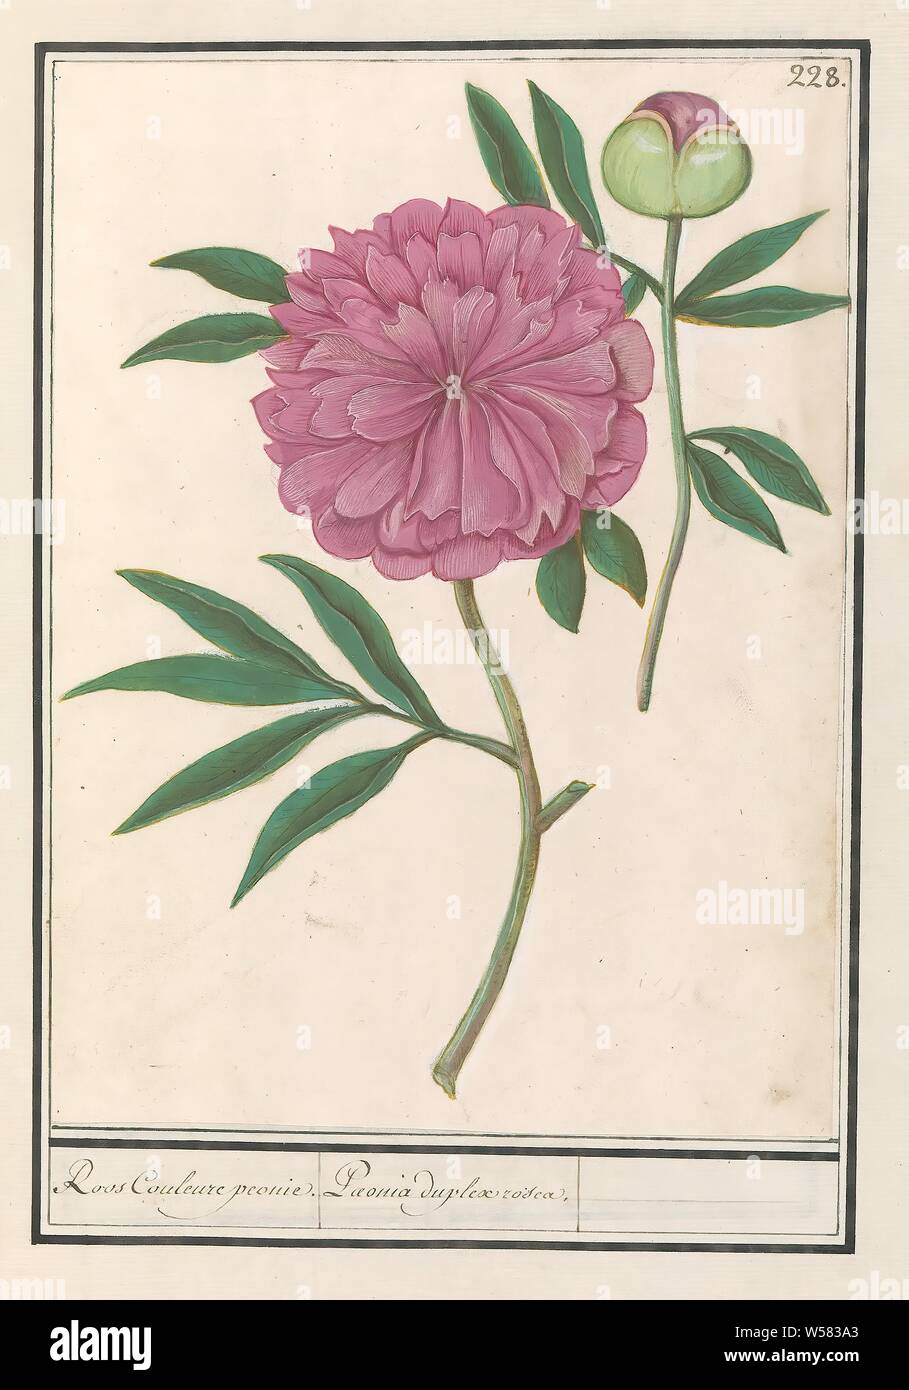 Peony (Paeonia) Rose Couleure Peonie. / Paeonia duplex rosea (title on object), Peony. Numbered top right: 228. Part of the third album with drawings of flowers and plants. Tenth of twelve albums with drawings of animals, birds and plants known around 1600, commissioned by Emperor Rudolf II. With explanations in Dutch, Latin and French., Anselmus Boetius de Boodt, 1596 - 1610, paper, watercolor (paint), deck paint, chalk, pen, h 255 mm × w 185 mm Stock Photo